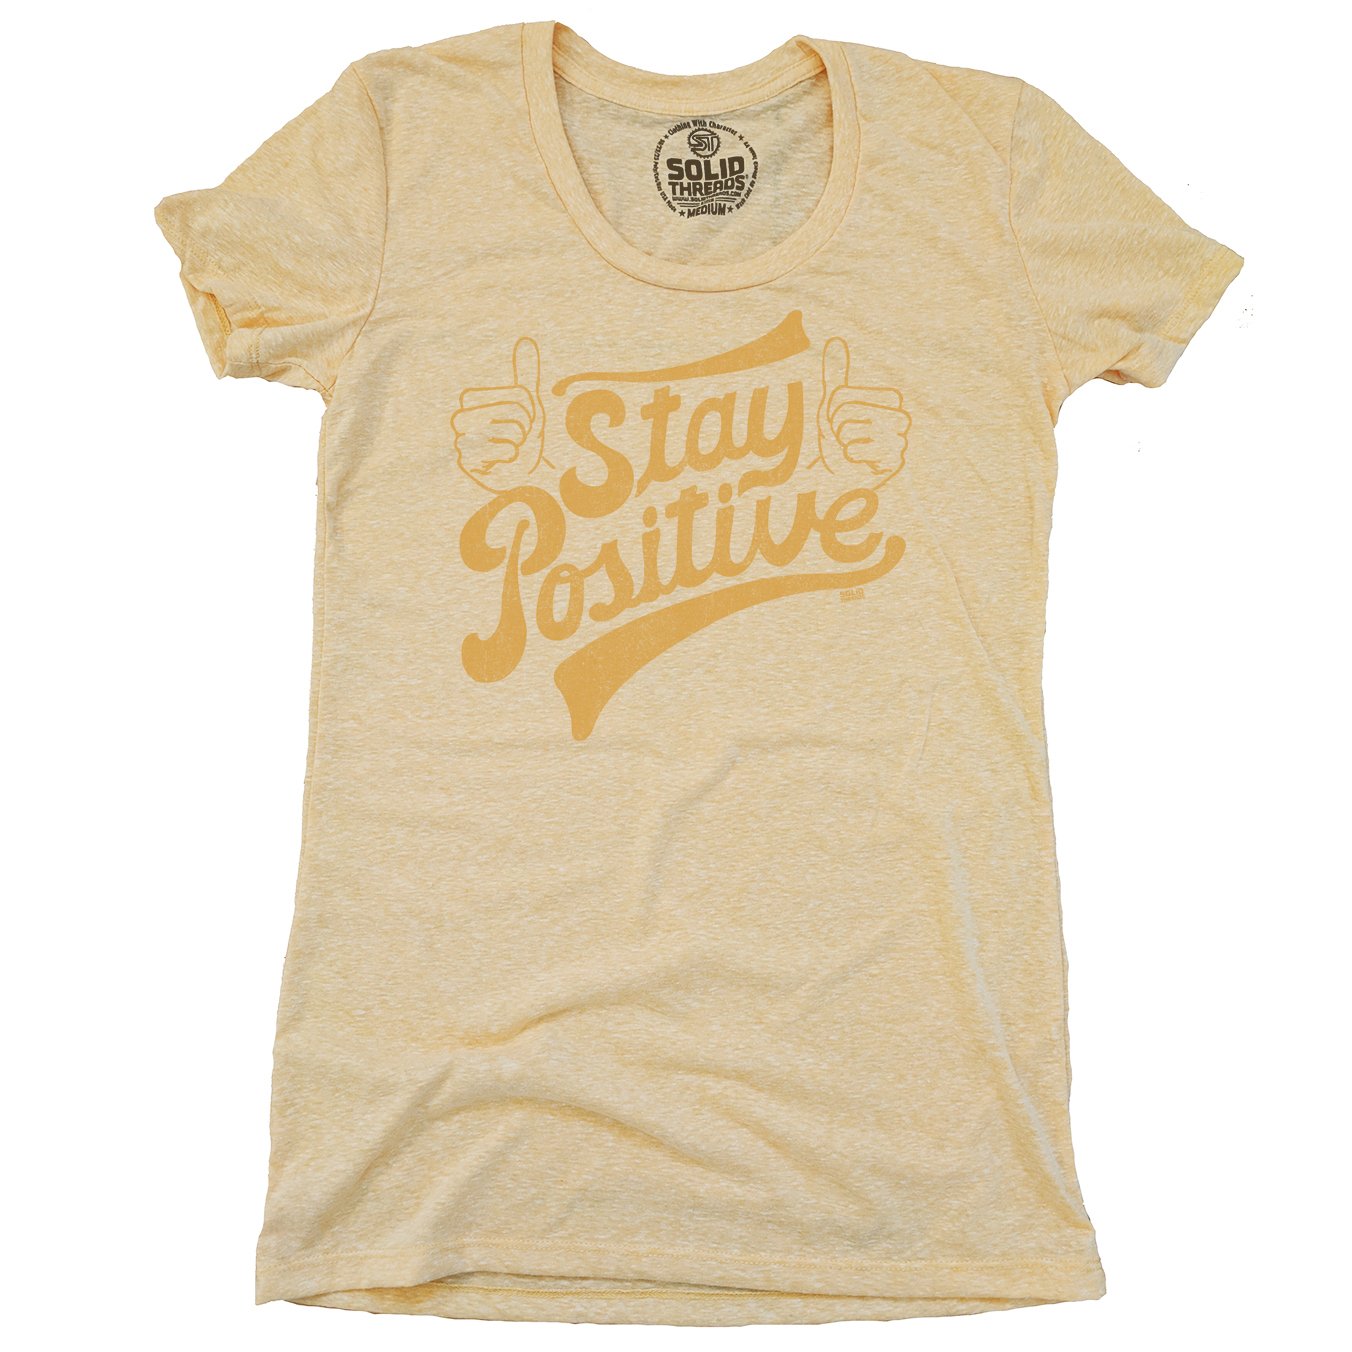 Women's Stay Positive Vintage Inspired Scoopneck Tee-shirt with Retro Thumbs Up Graphic | Solid Threads